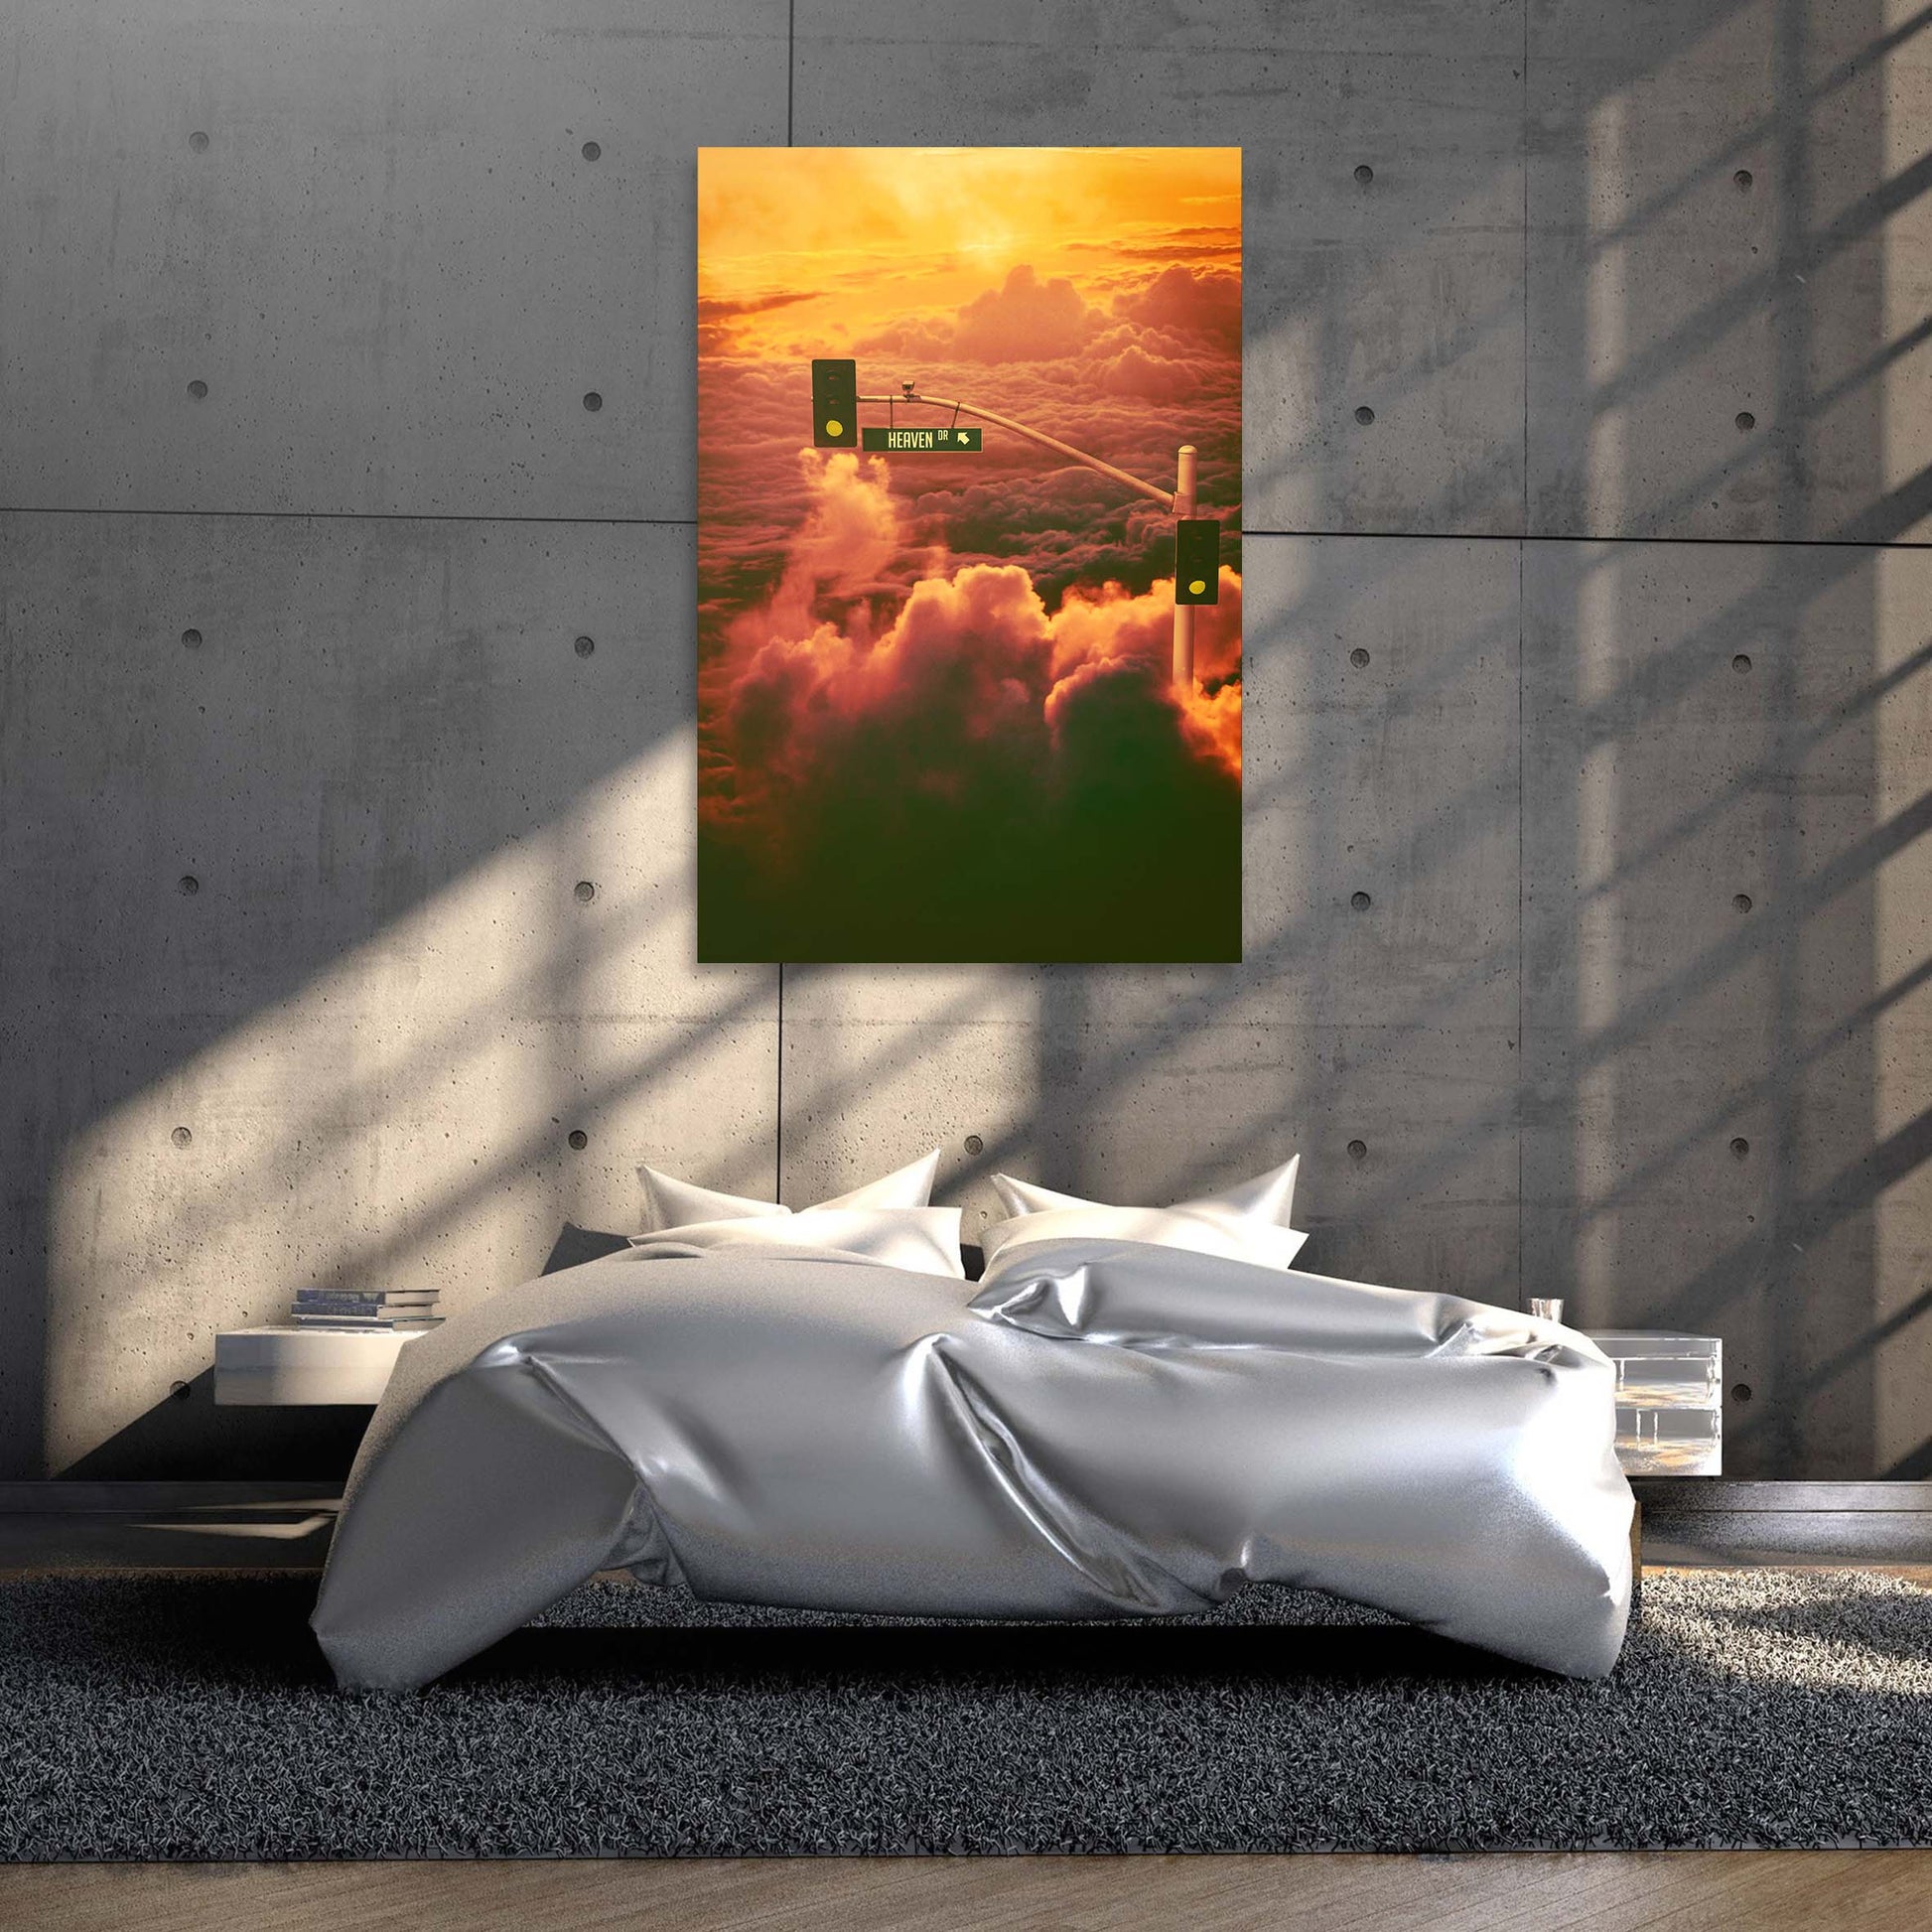 Pathway to Heaven Wall Art | Inspirational Wall Art Motivational Wall Art Quotes Office Art | ImpaktMaker Exclusive Canvas Art Portrait